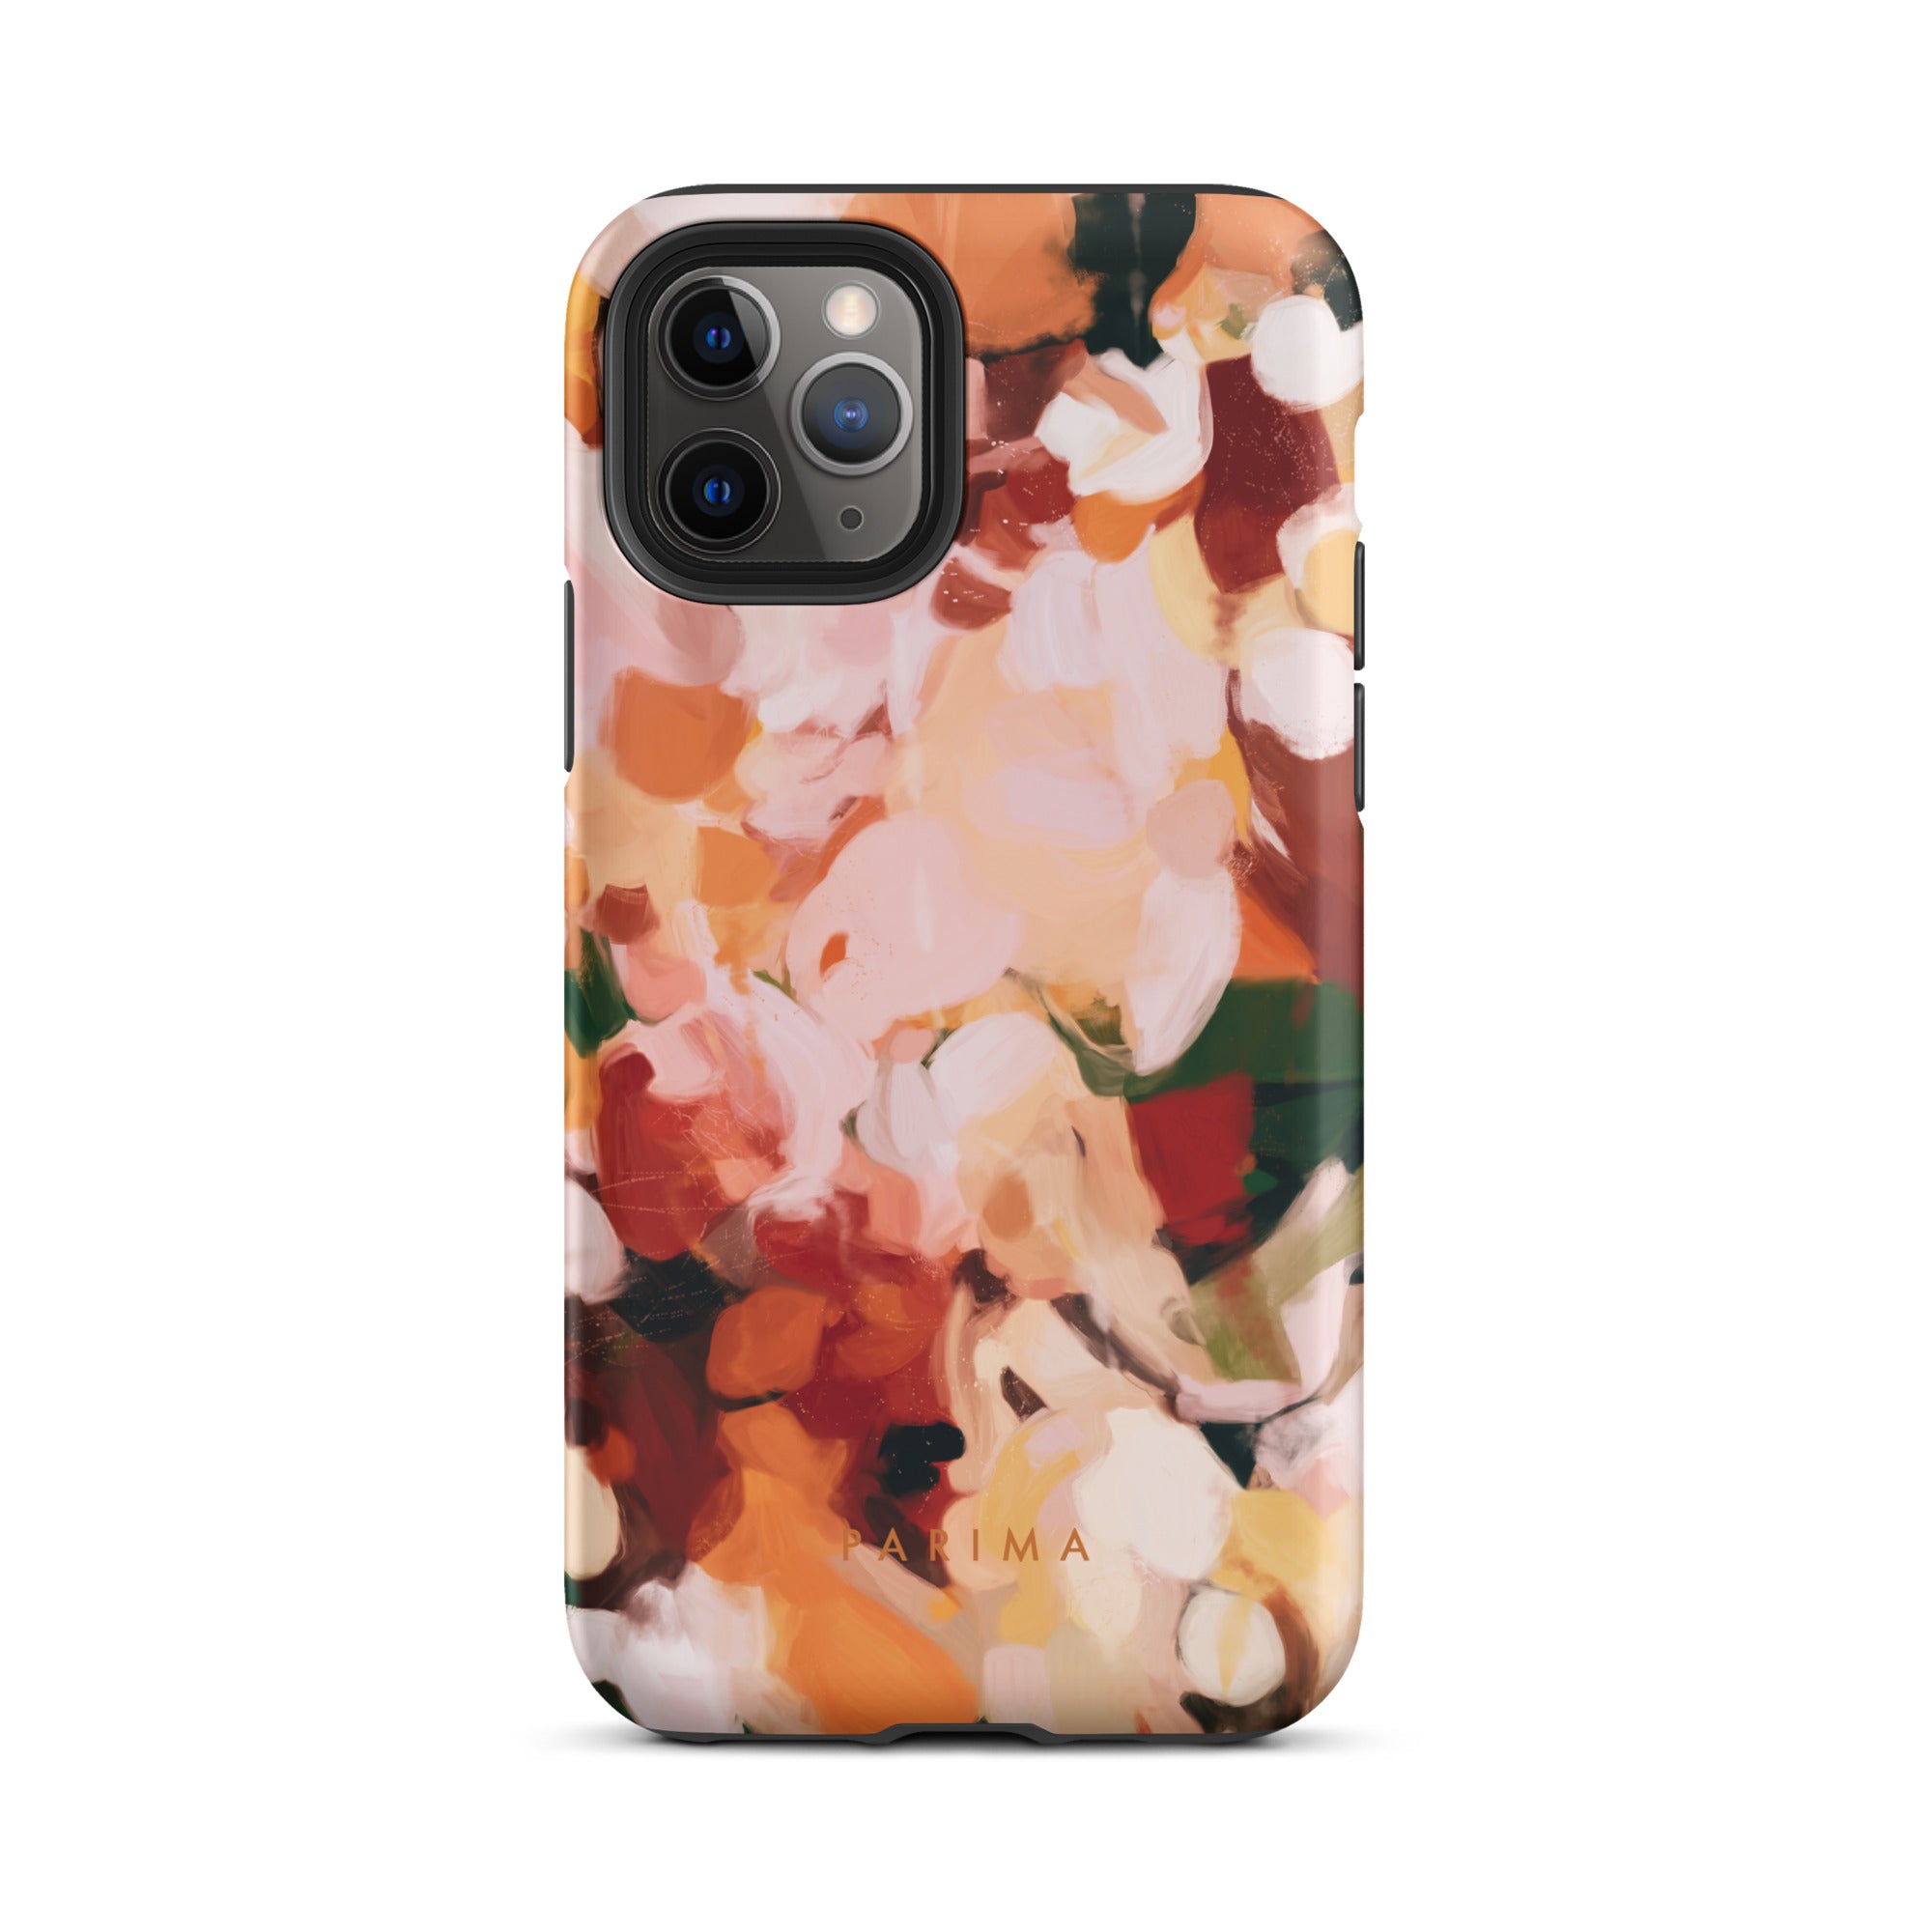 The Grove, pink and green abstract art on iPhone 11 Pro tough case by Parima Studio